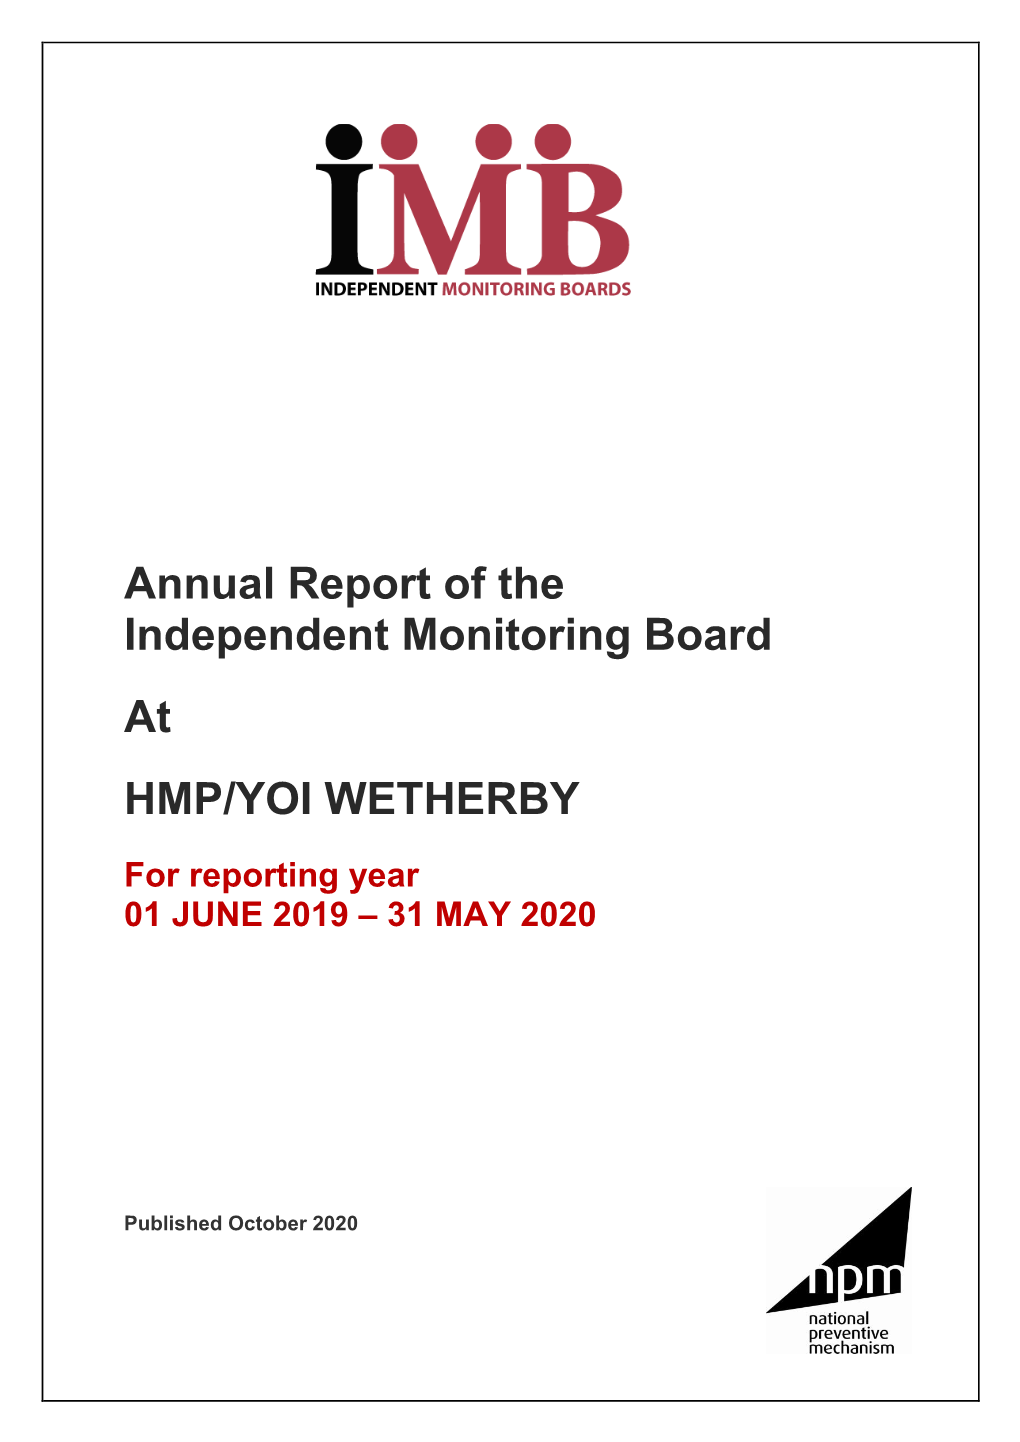 Annual Report of the Independent Monitoring Board at HMP/YOI WETHERBY